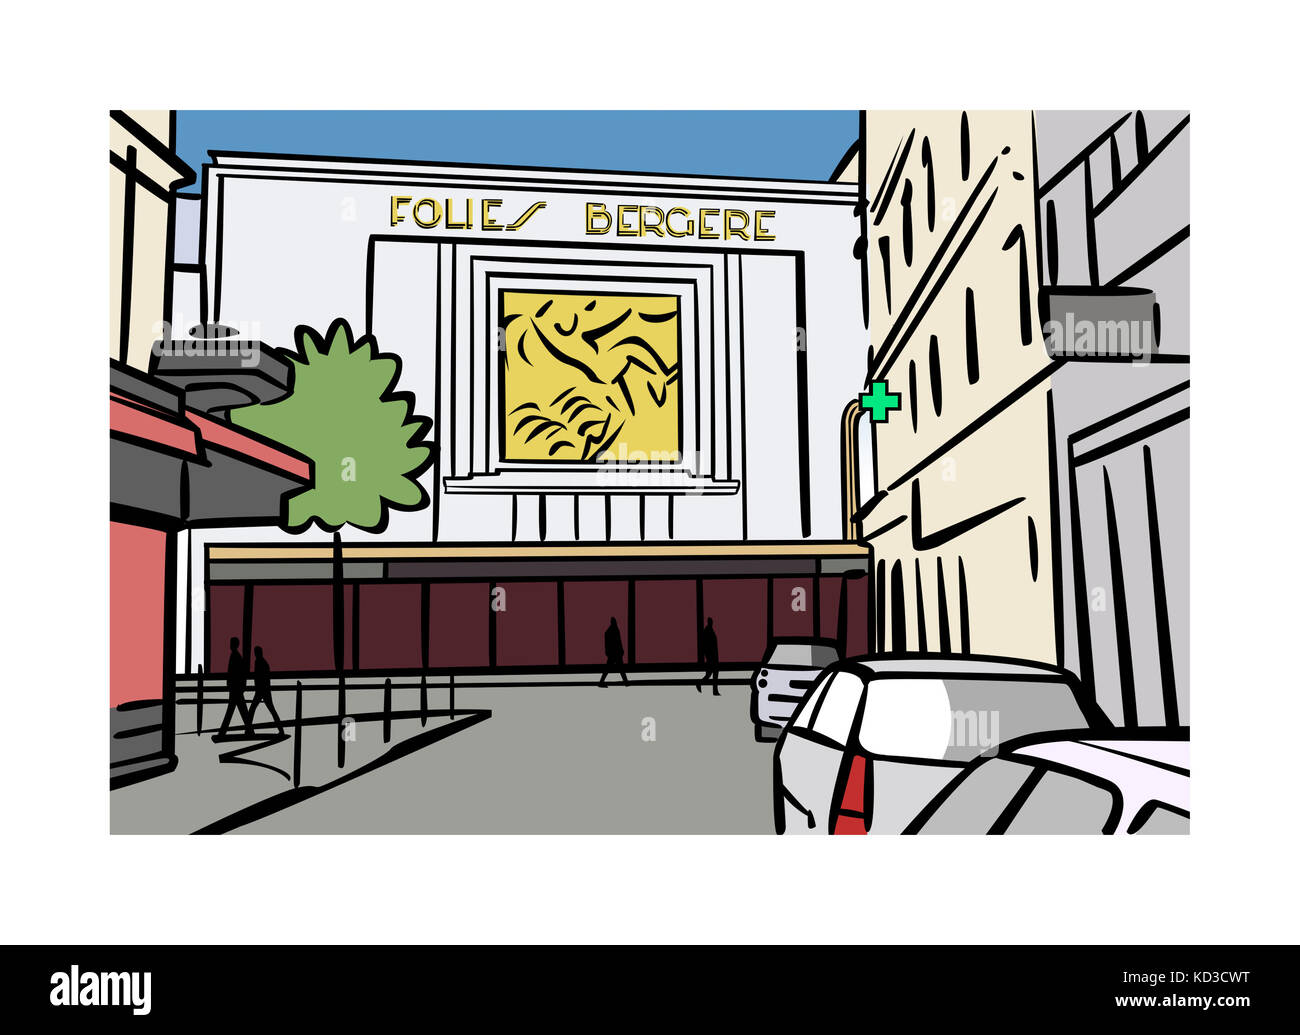 Illustration of the Folies Bergre in Paris, France Stock Photo